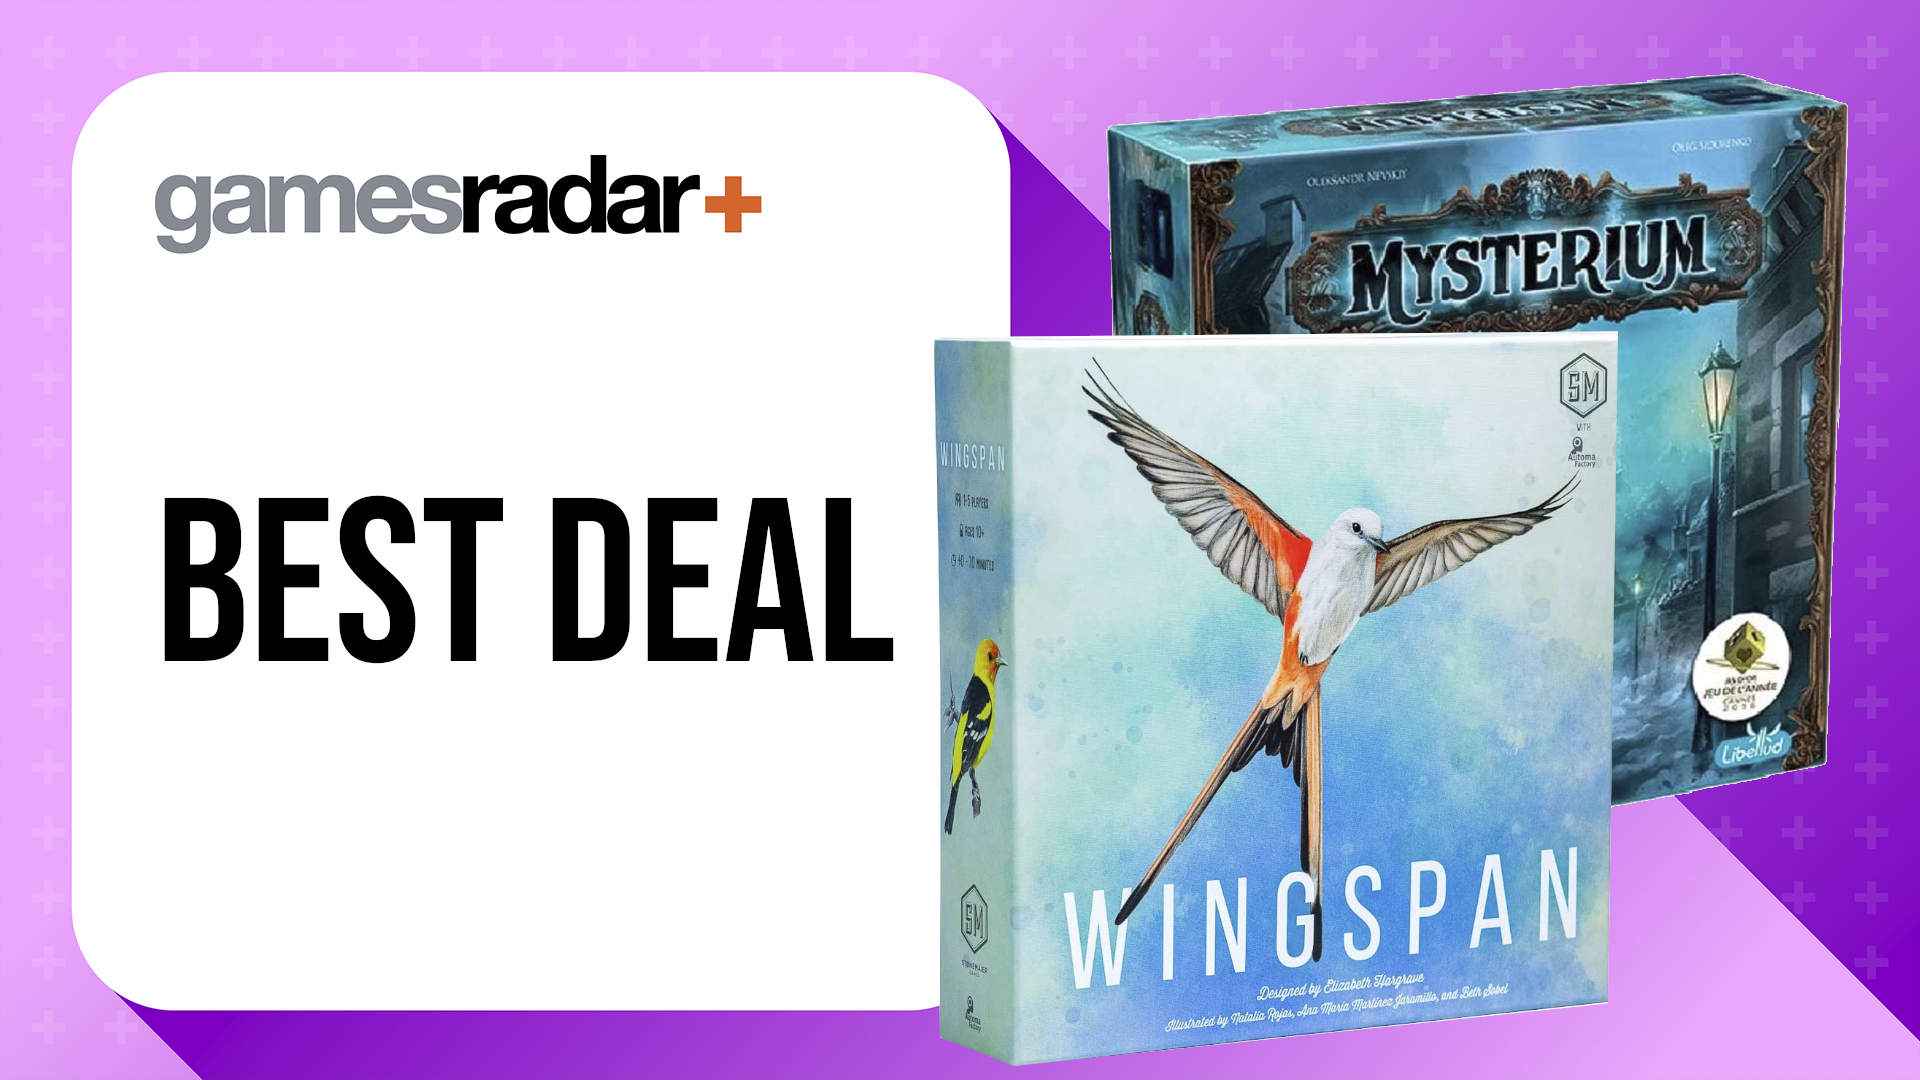 Cyber Monday board game deals with Wingspan and Mysterium